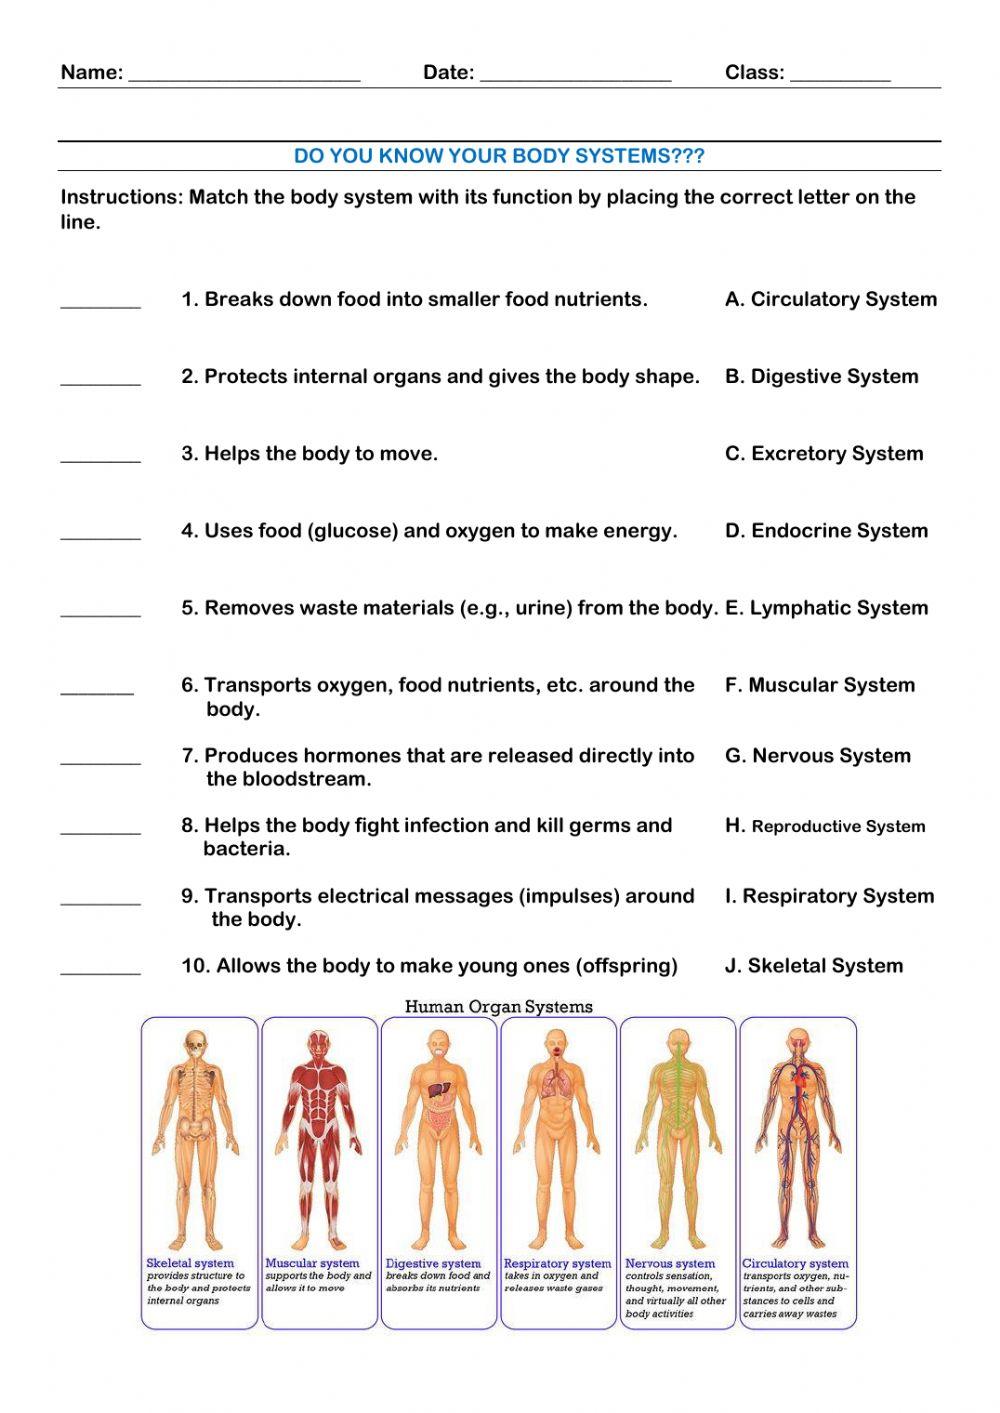 Function of Body Systems